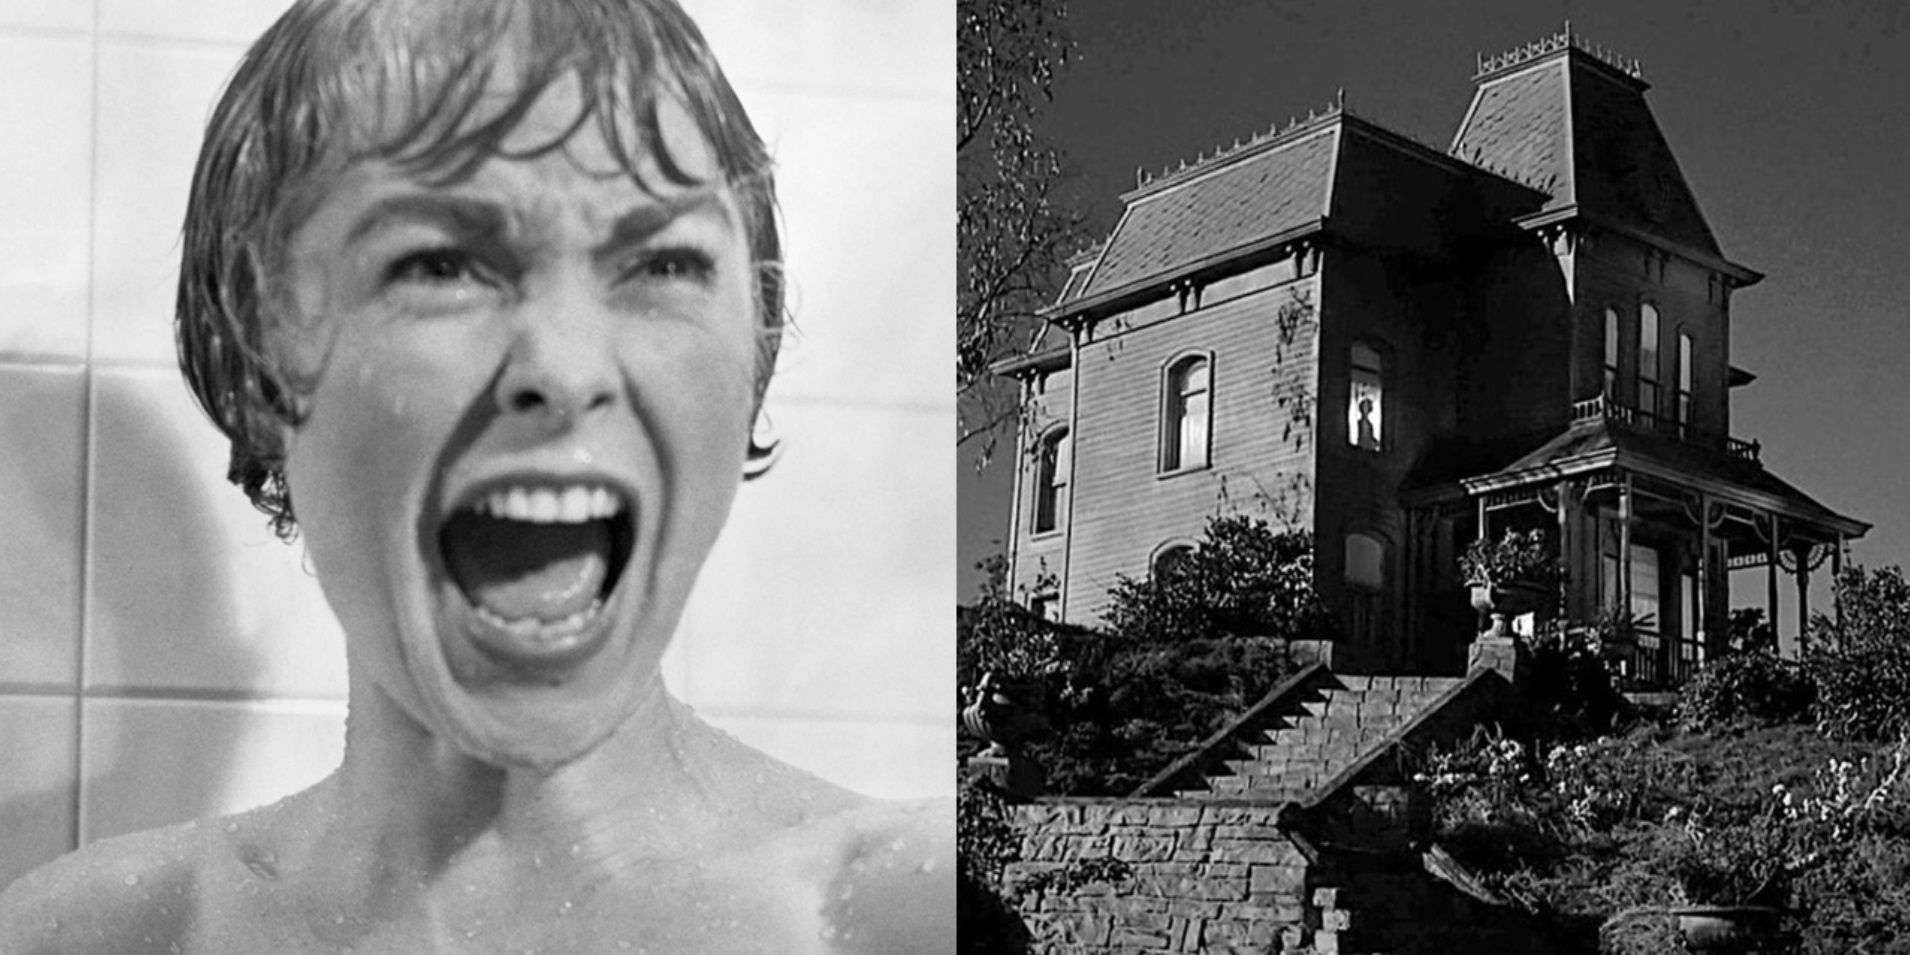 Split image of Marion Crane in the shower and the Bates house in Psycho